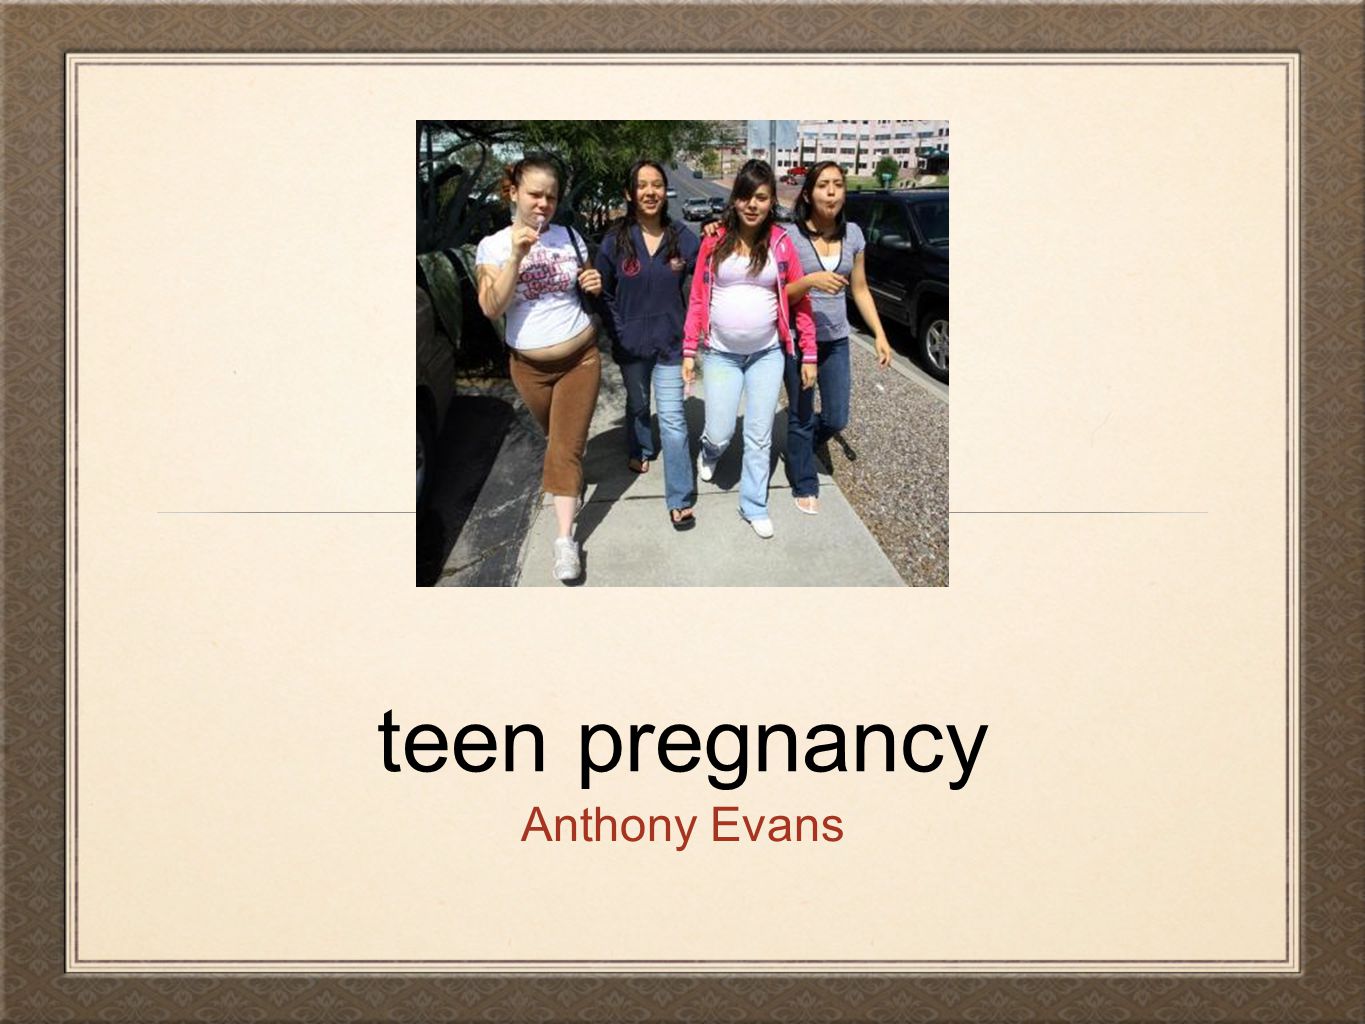 Teen Page